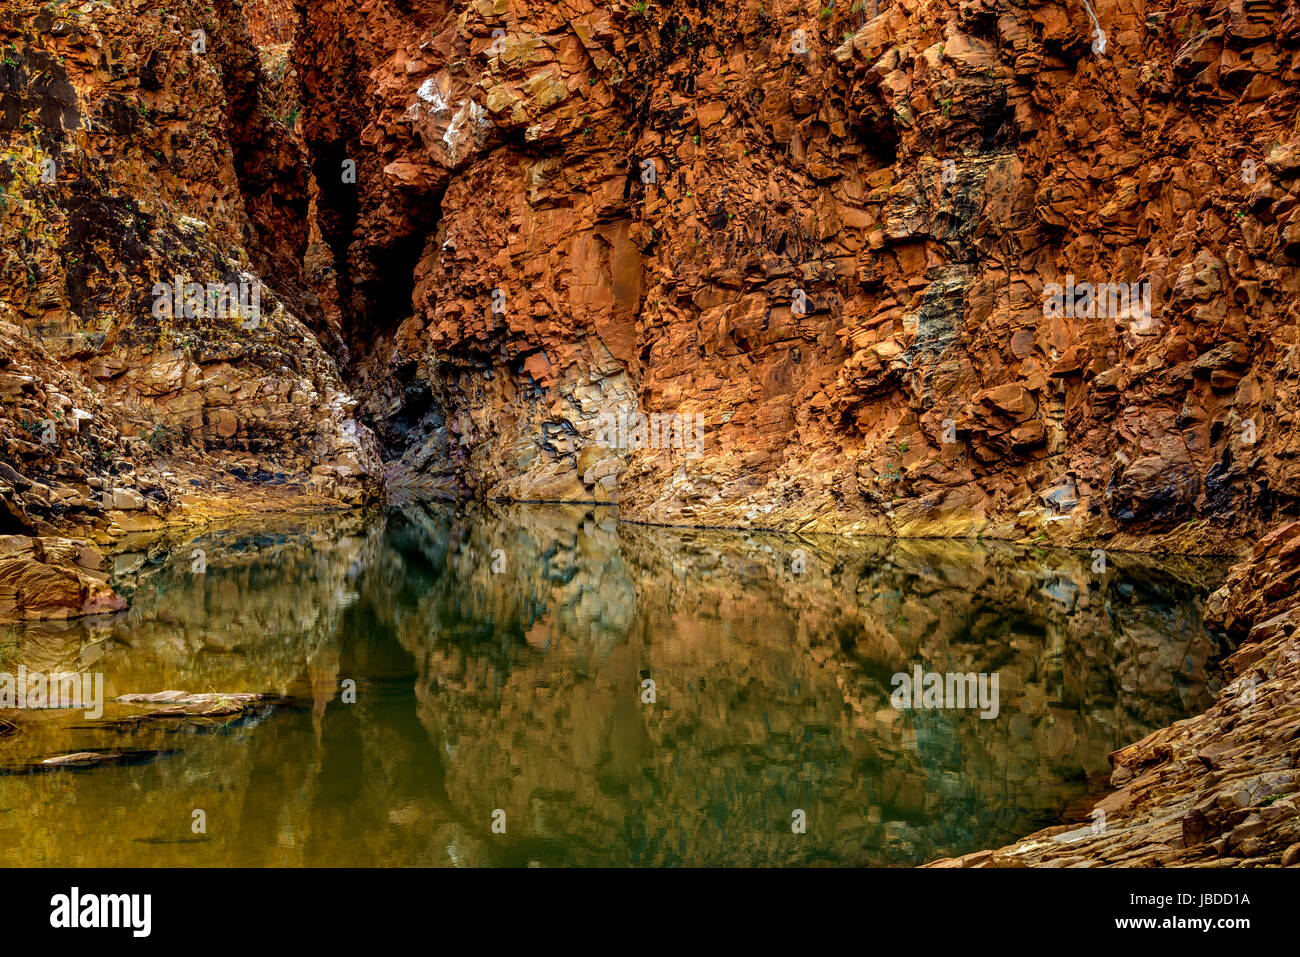 Redbank Gorge in West Macdonnell Ranges, Northern Territory Stockfoto